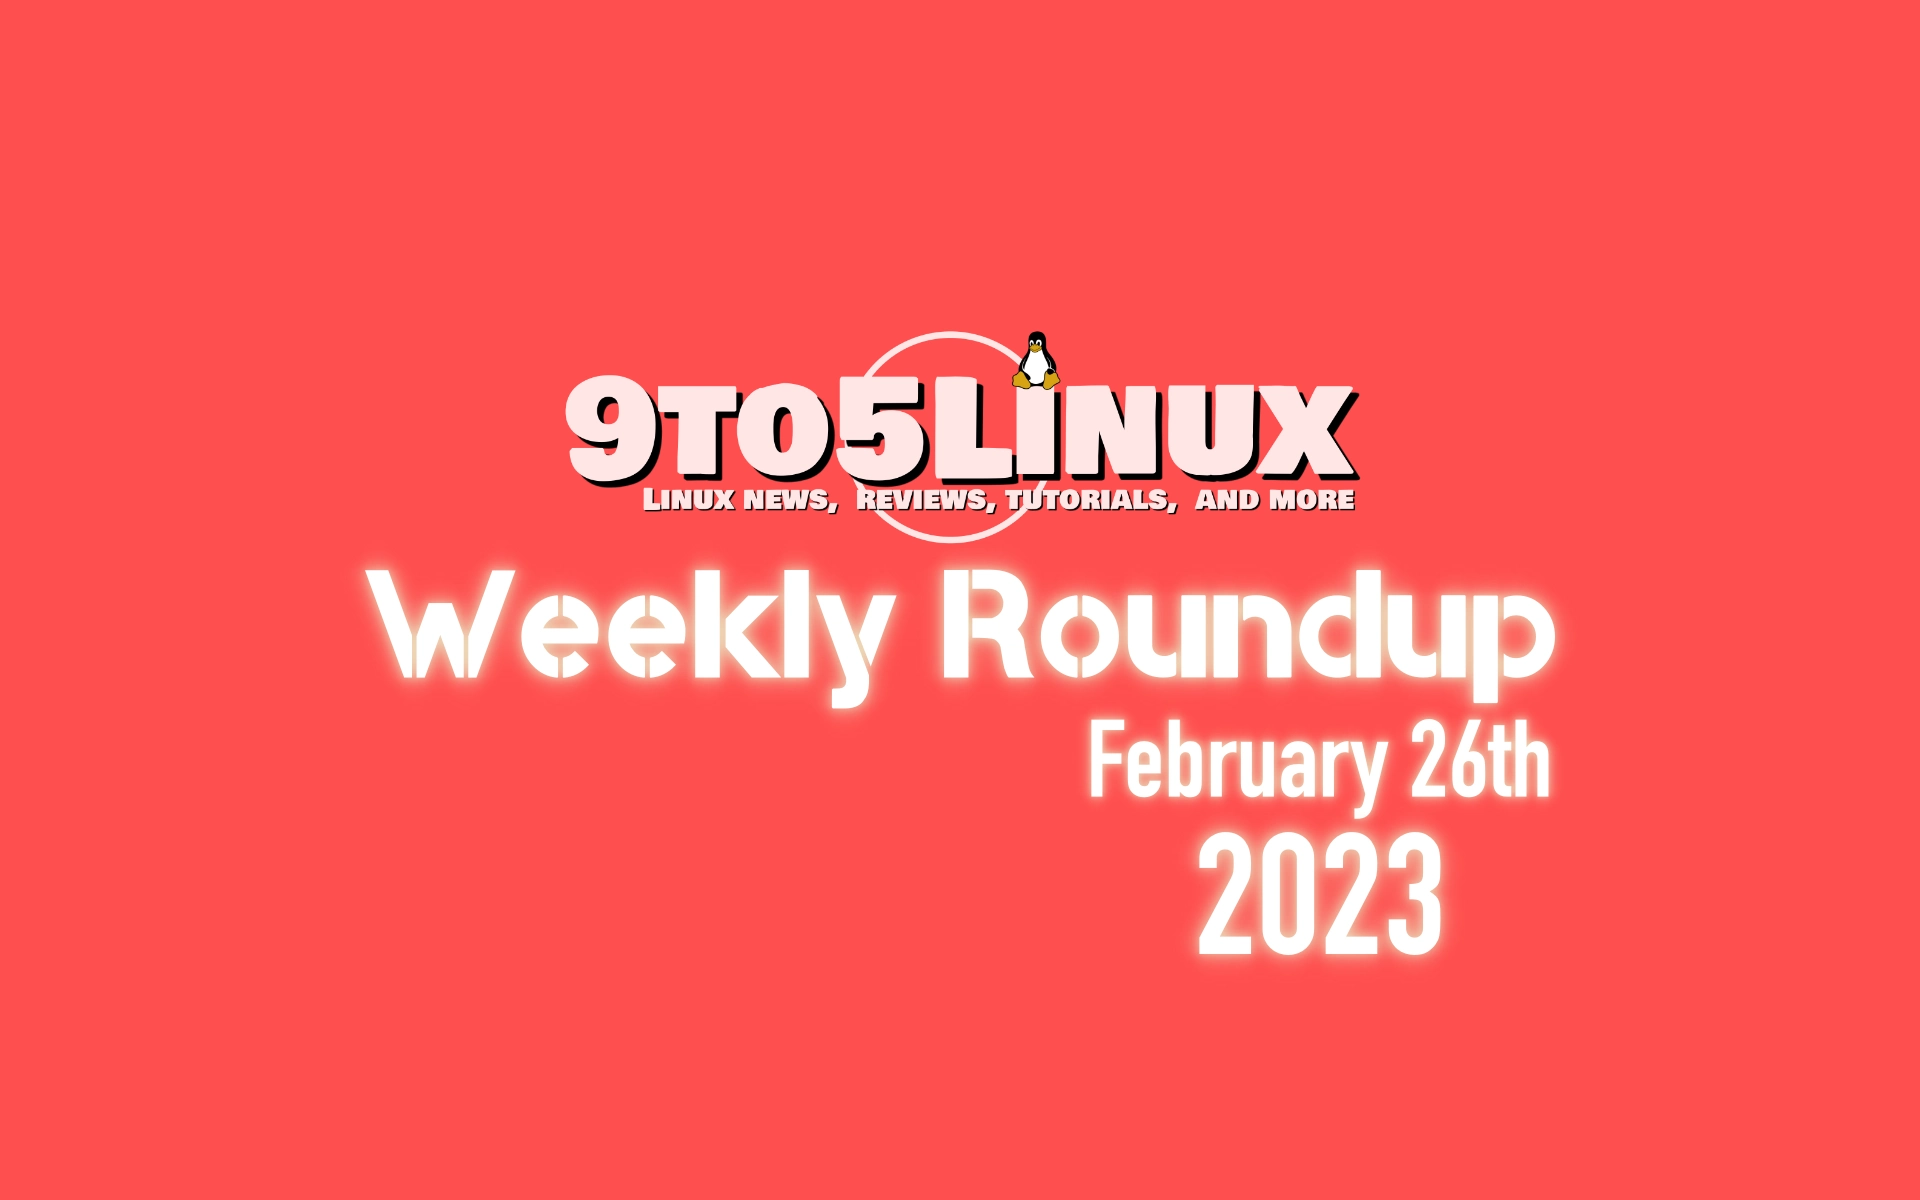 9to5Linux Weekly Roundup: February 26th, 2023